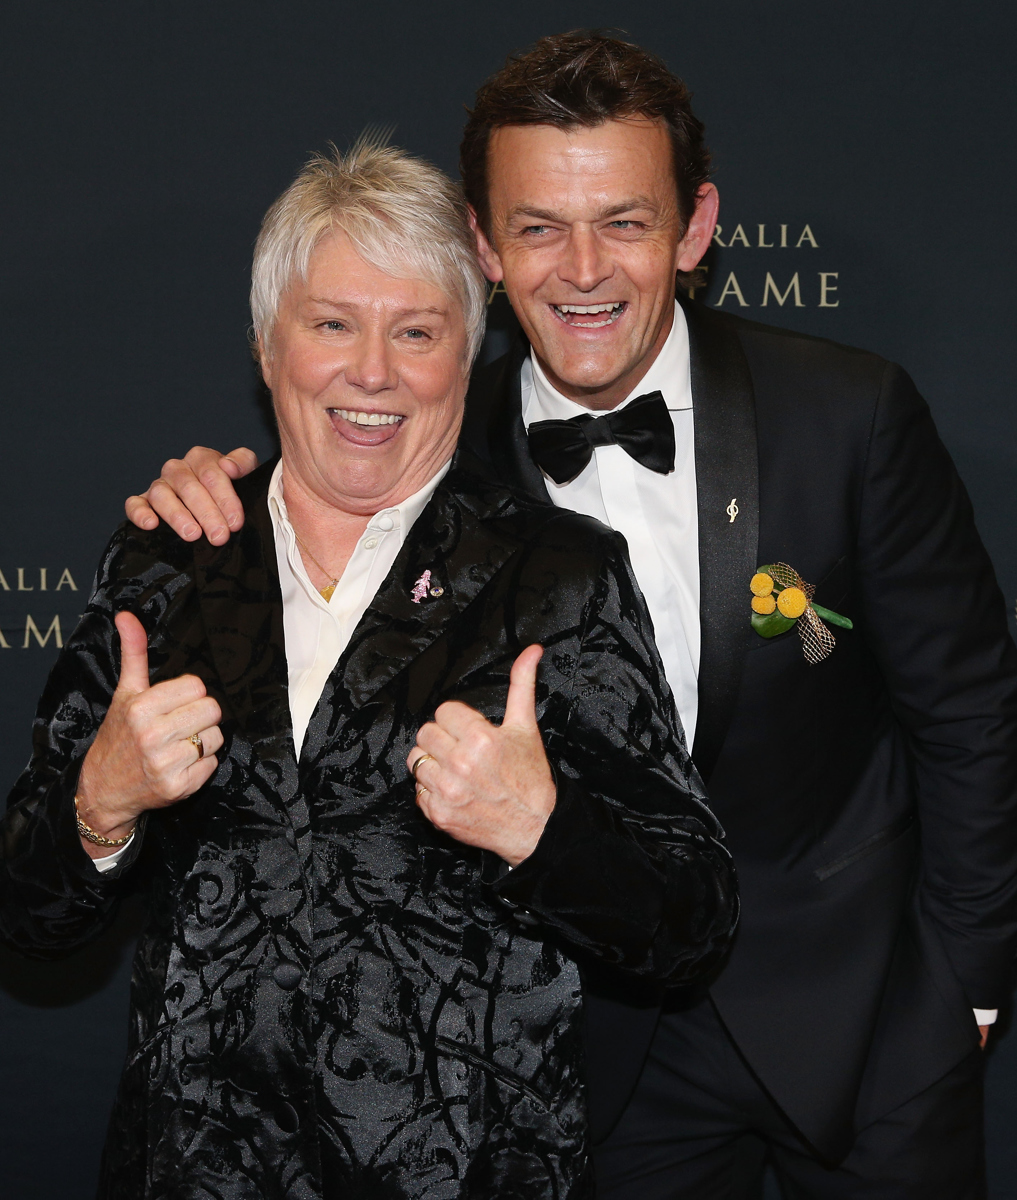 Raelene Boyle poses with Adam Gilchrist at the Sport Australia Hall of Fame Annual Induction and Awards Gala Dinner. Pic: Michael Dodge/Getty Images